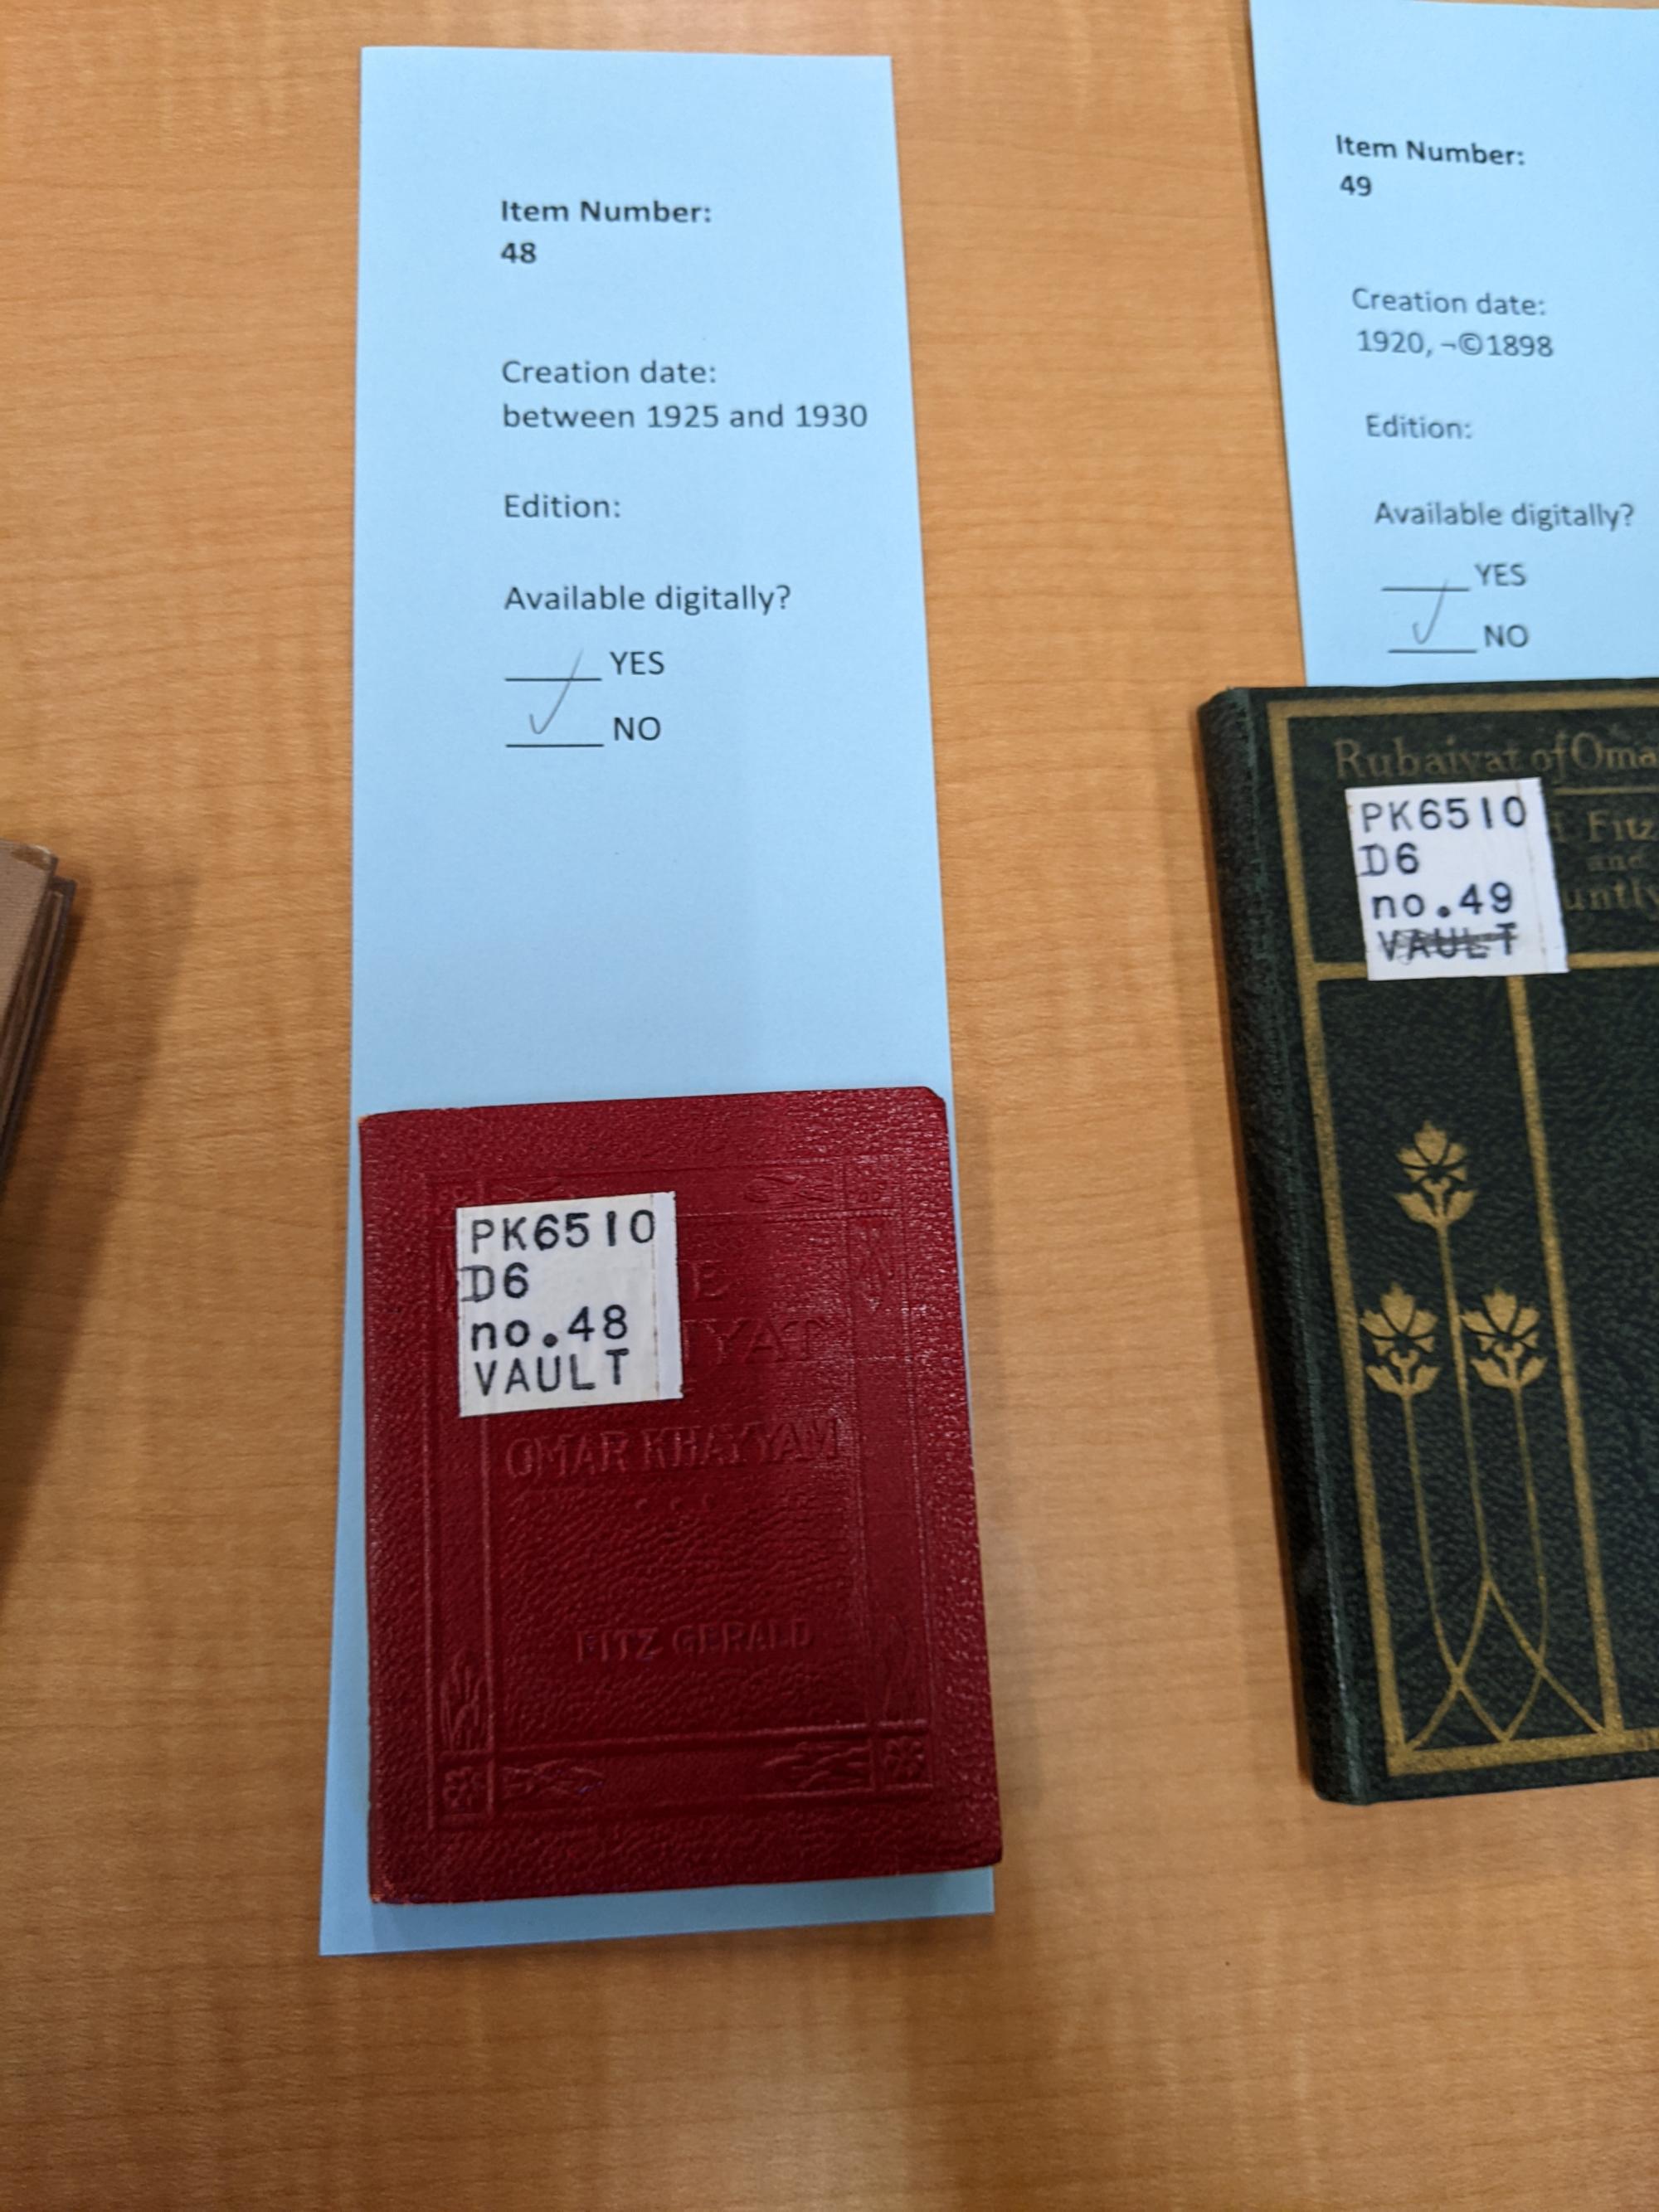 A small red book sitting on a blue slip of paper labeled: "Item Number 48, Creation date 1925-1930, Edition available digitally? NO"